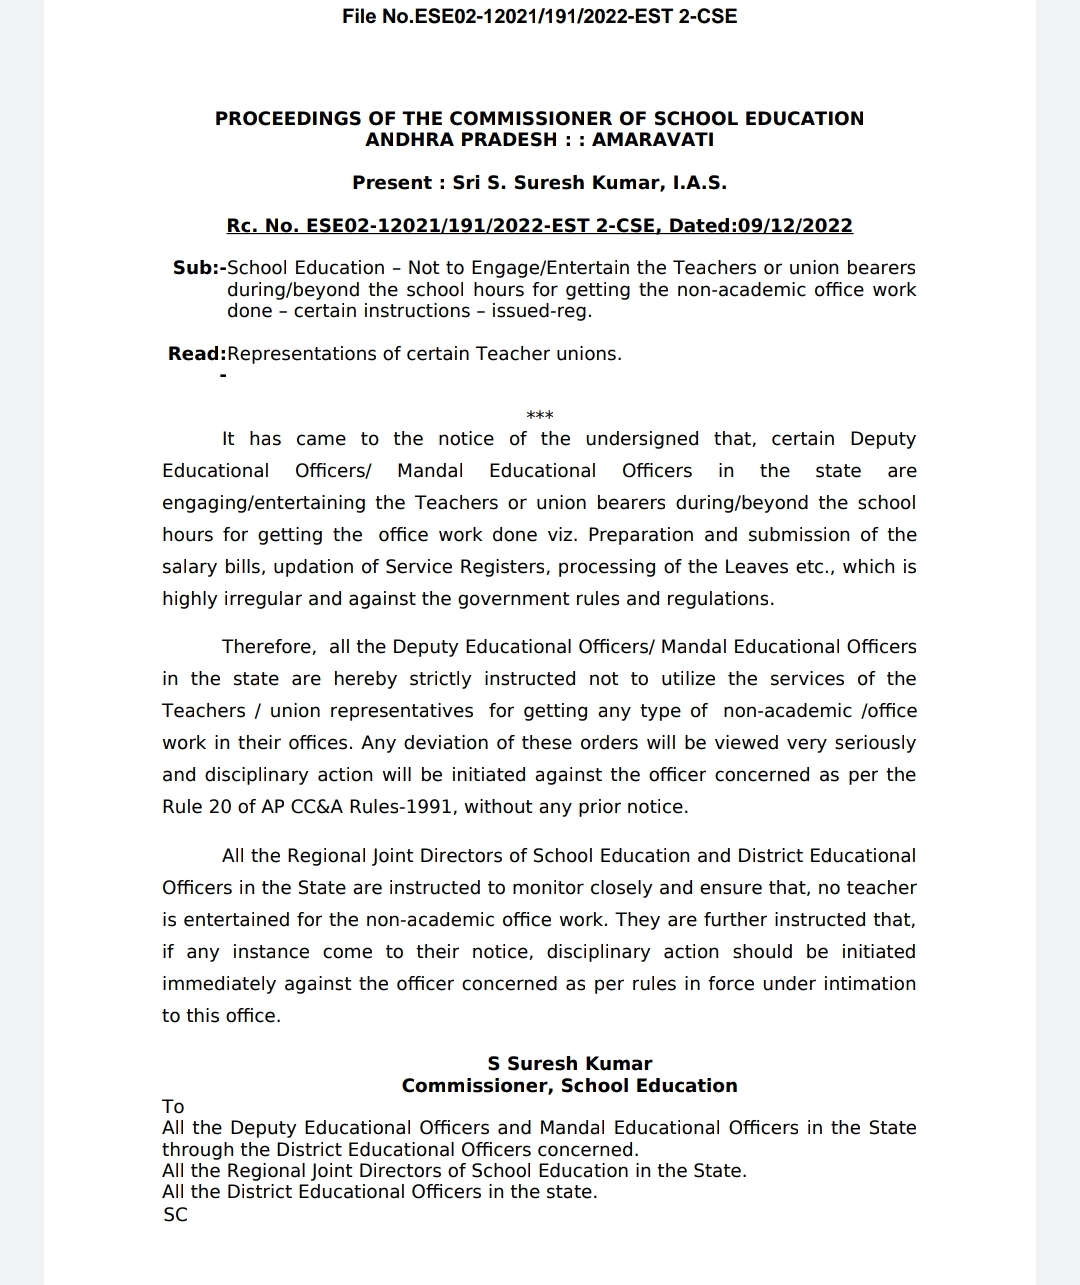   Not to Engage/Entertain the Teachers or union bearers during/beyond the school hours for getting the non-academic office work done - certain instructions,Rc. No. ESE02-12021/191/2022-EST 2-CSE, Dated:09/12/2022